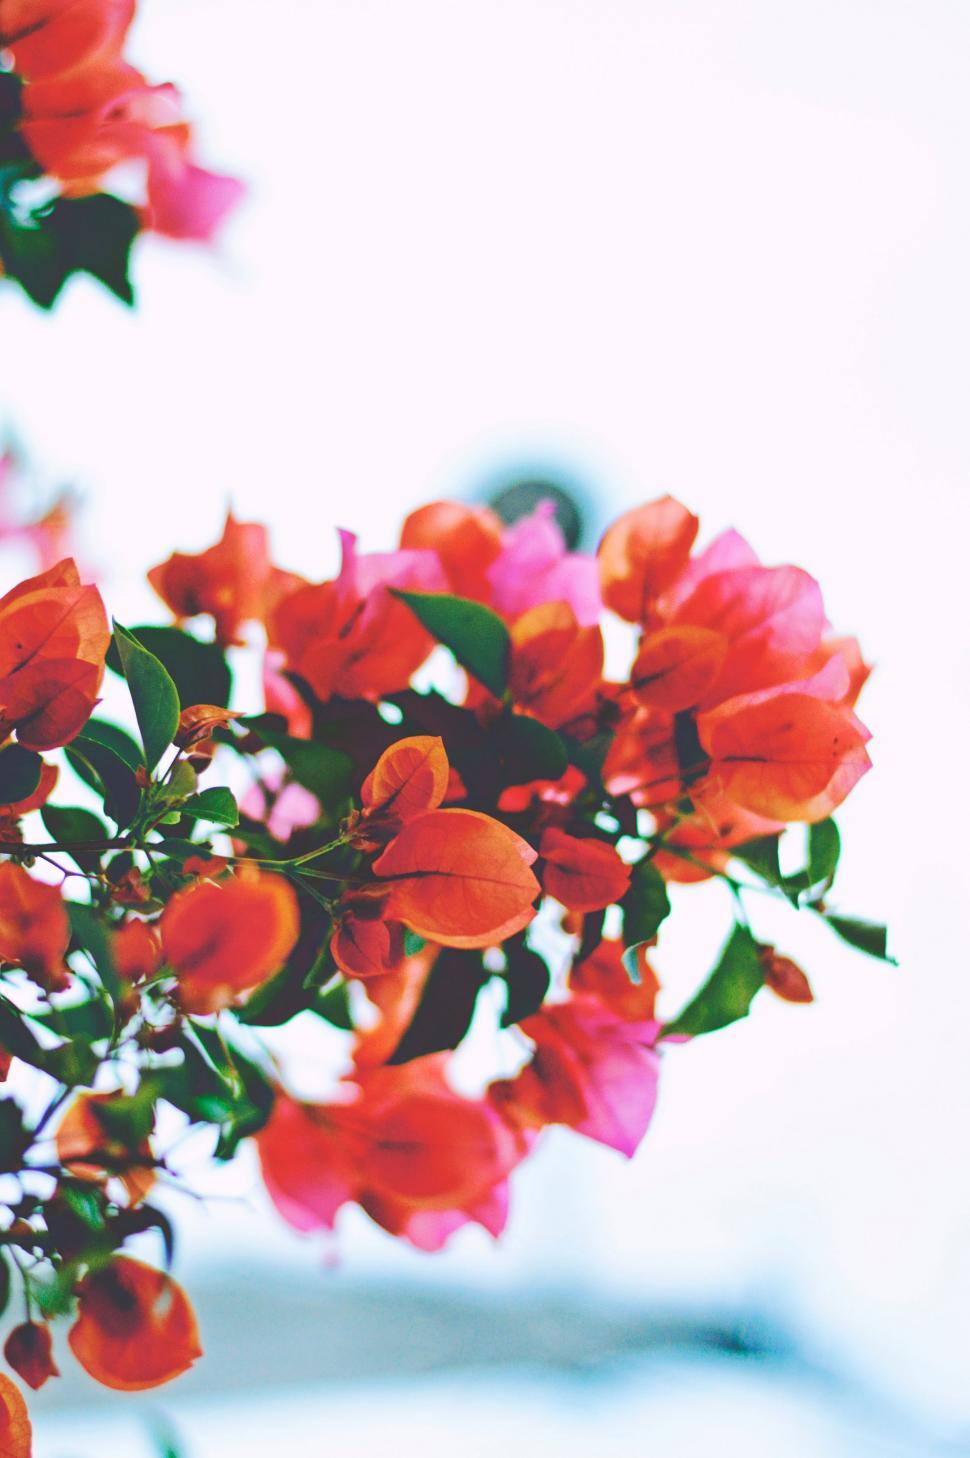 Free Image of A Bunch of Red Flowers in a Vase 